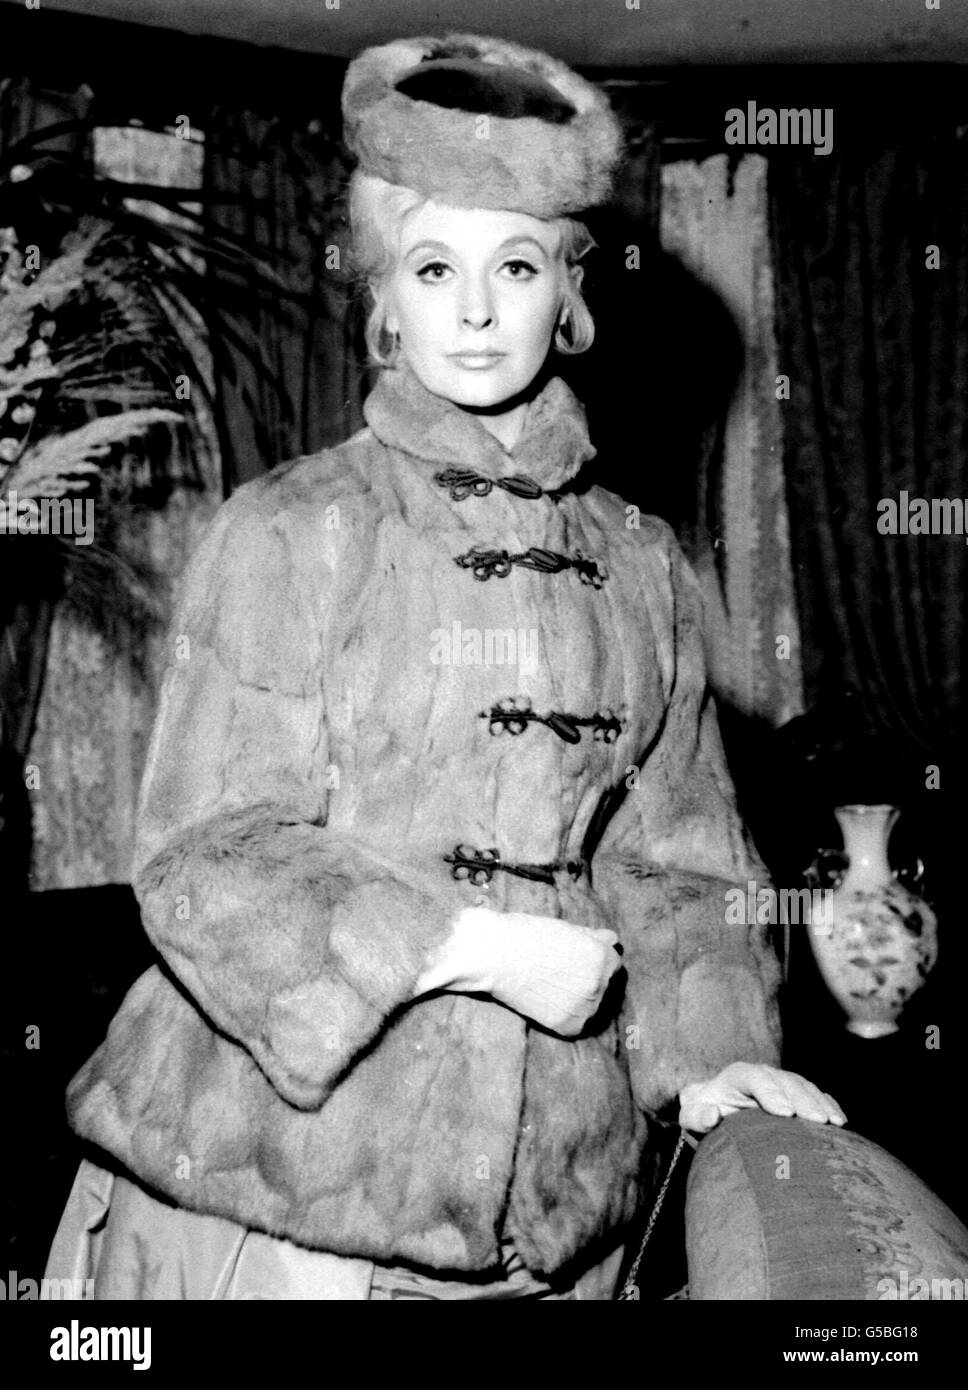 Actress Nyree Dawn Porter as Irene in the 1960's drama, The Forsyte Saga. 11/4/01: The actress has died aged 61. The New Zealand born actress, died at her home in London, and the cause of death was not immediately known. * Nyree Dawn Porter was awarded an OBE in 1971 for services to television and starred in a number of well remembered programmes such as Madame Bovary and the 1980 drama For Maddie With Love. Stock Photo